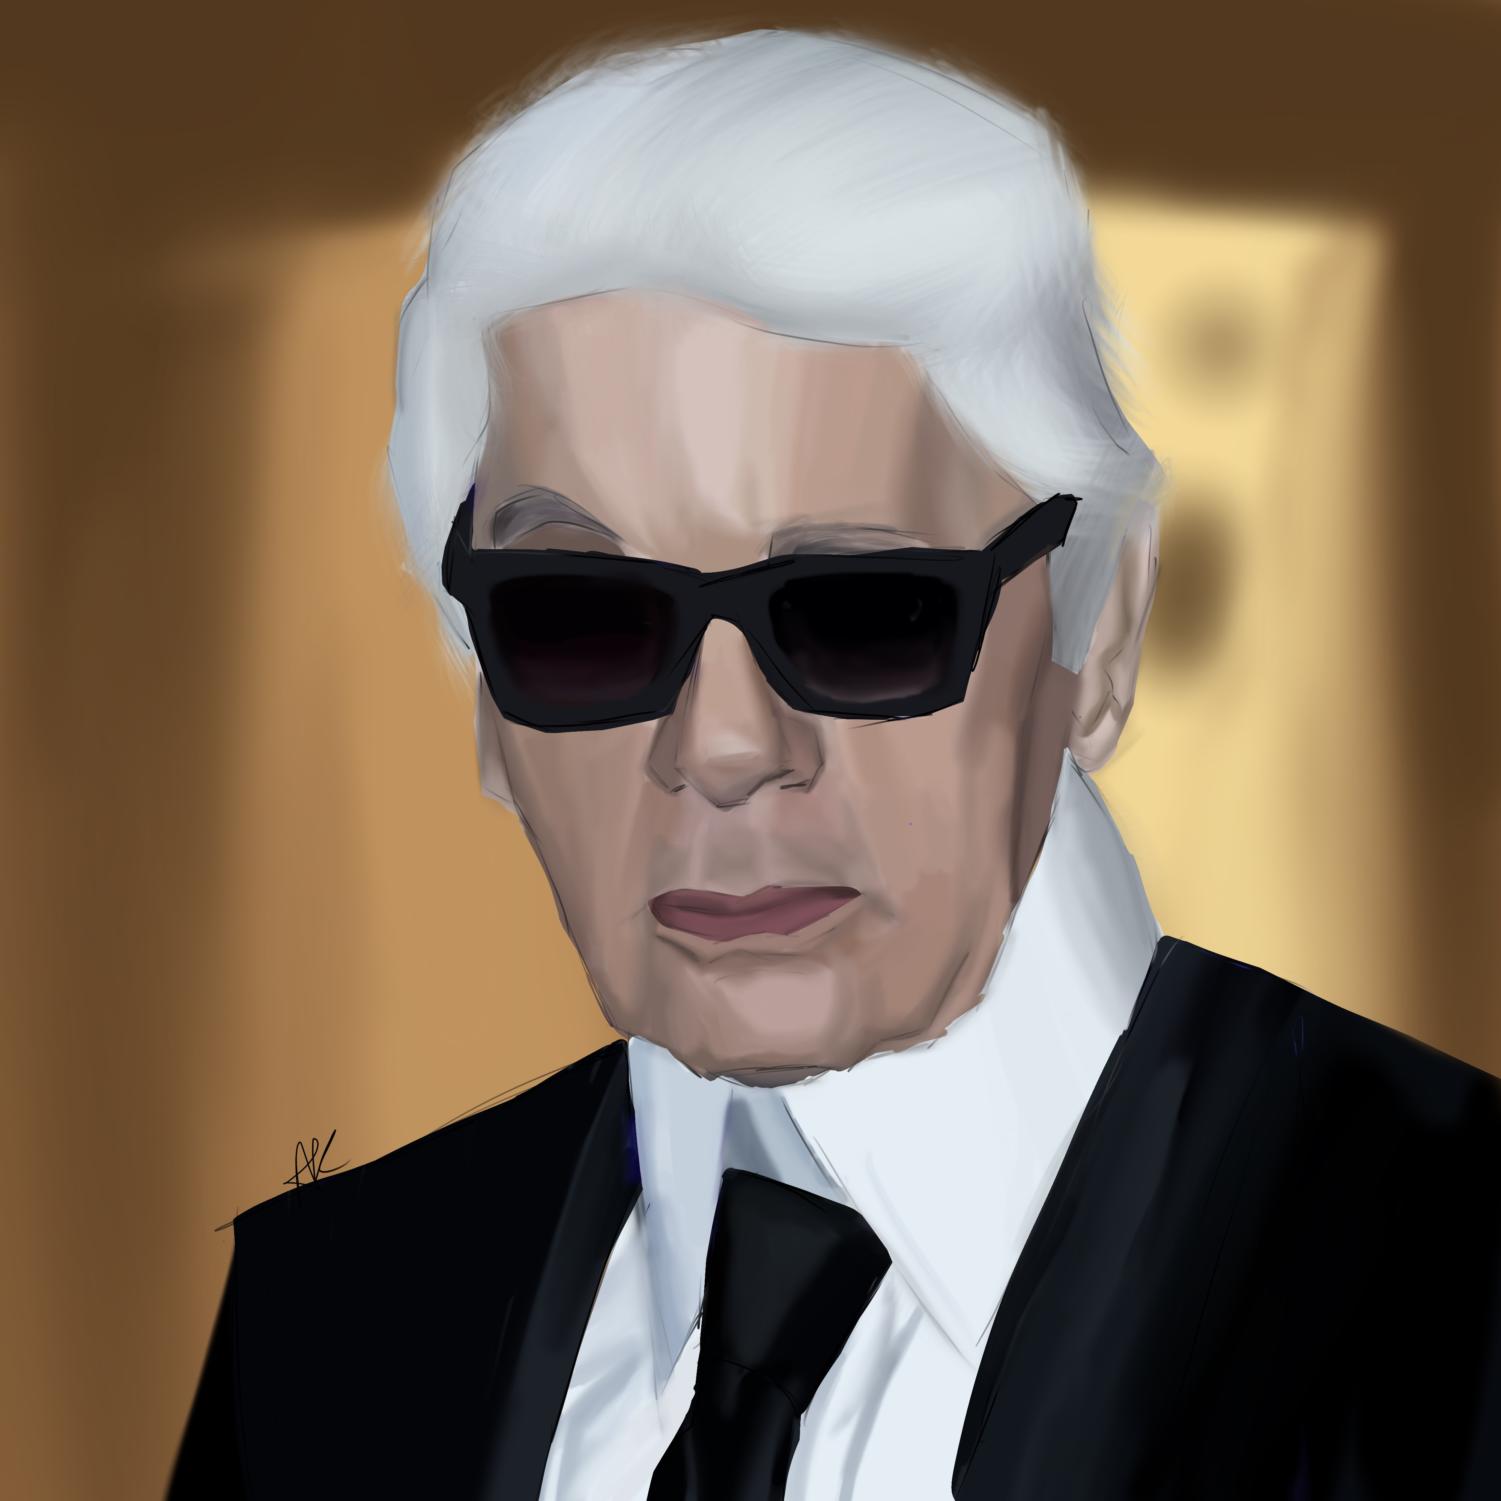 Karl Lagerfeld: A Line of Controversy – We Are